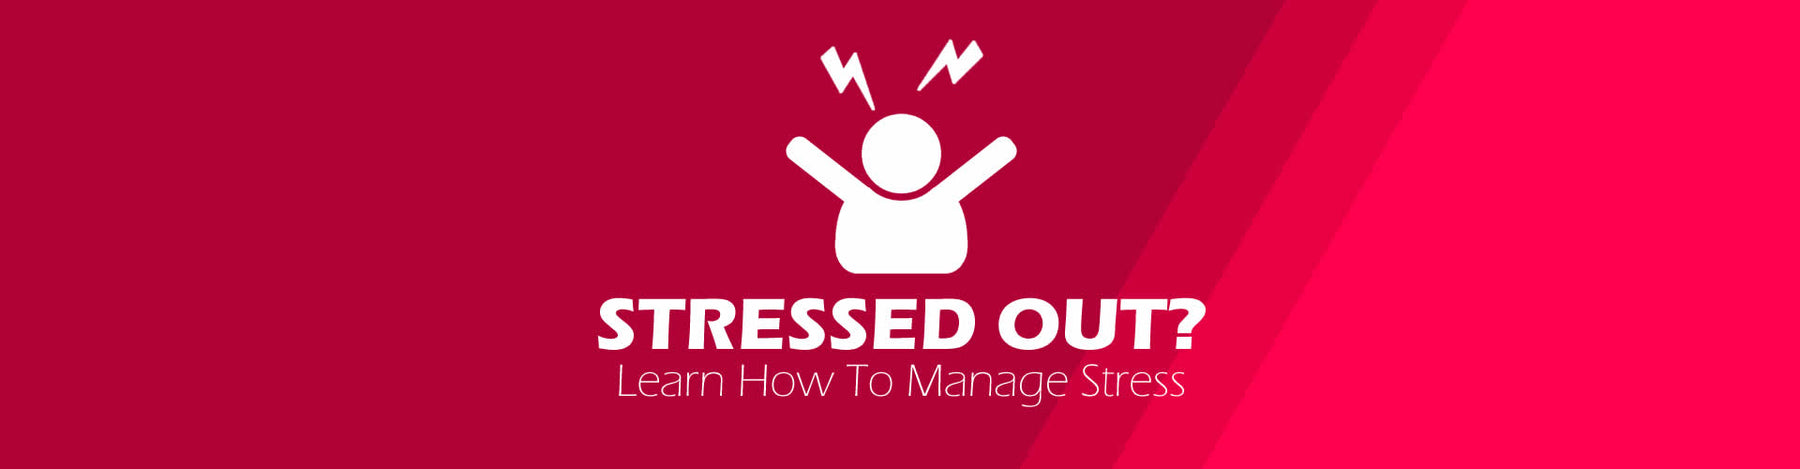 tips-to-manage-stress-blog